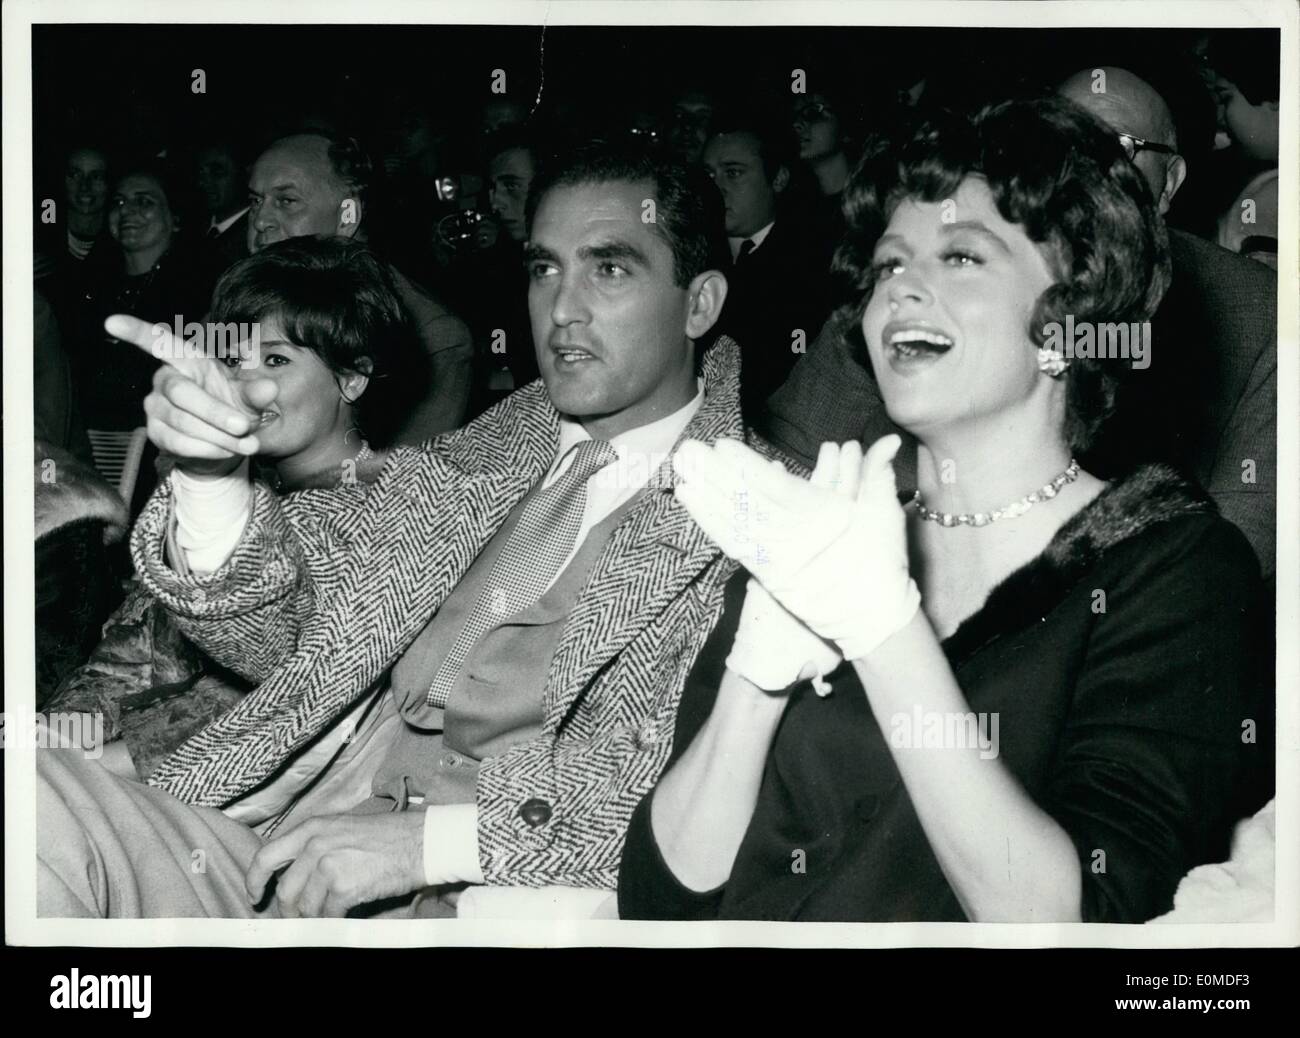 Sep. 09, 1954 - Rome/American actor Jacques Bergerac enjoies at Circus with his wife actress Dorothy Malone last night. at left, besides them is miss Maria Scicolone Sister of movie star Sophia Loren. Stock Photo